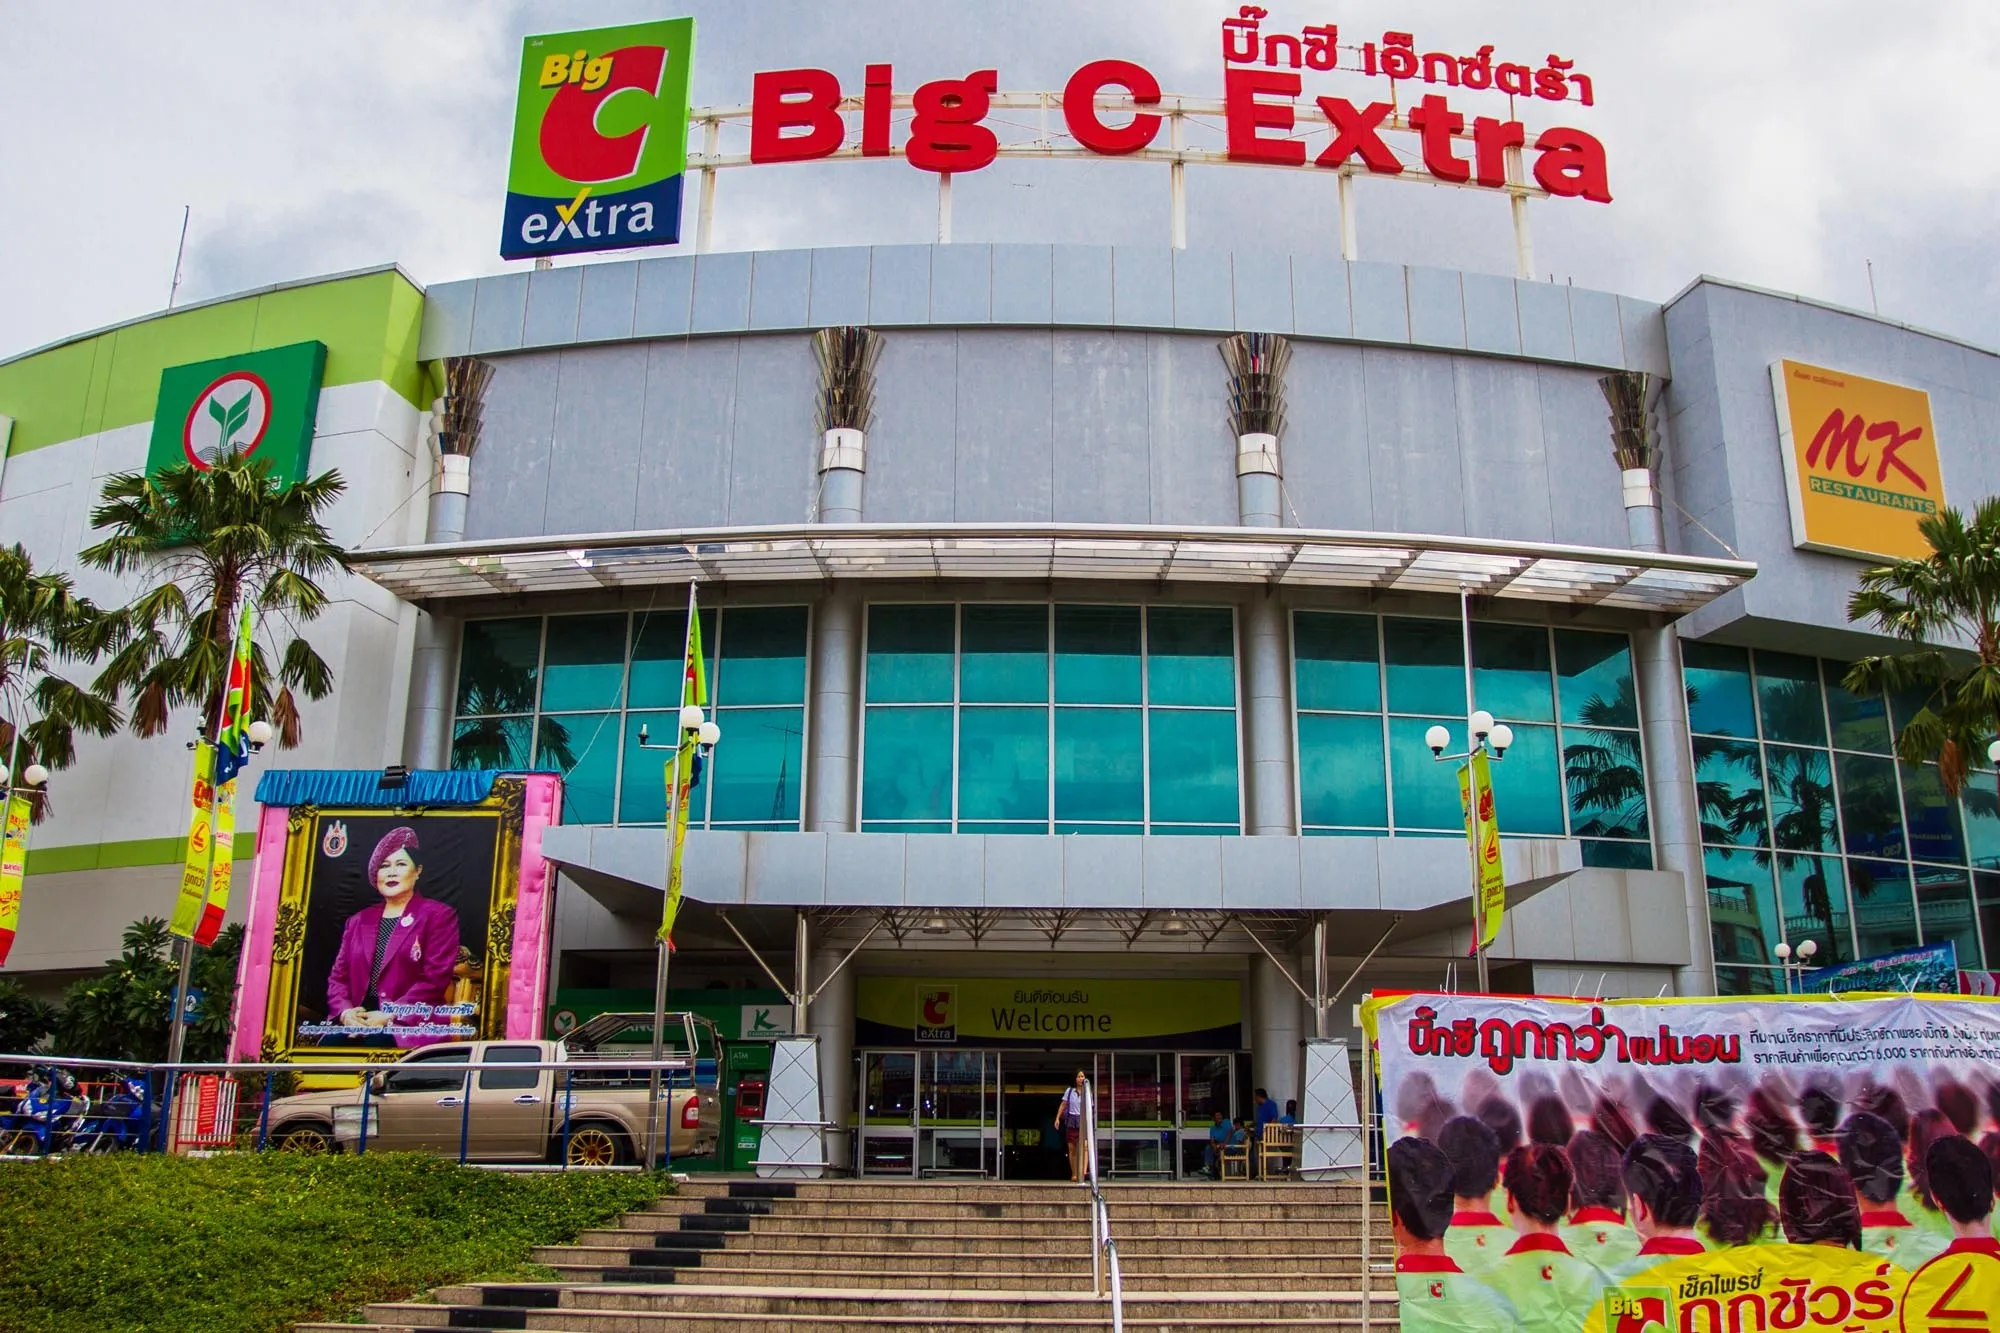 Big C Extra in Thailand, central_asia | Handbags,Shoes,Accessories,Sweets,Gifts - Country Helper